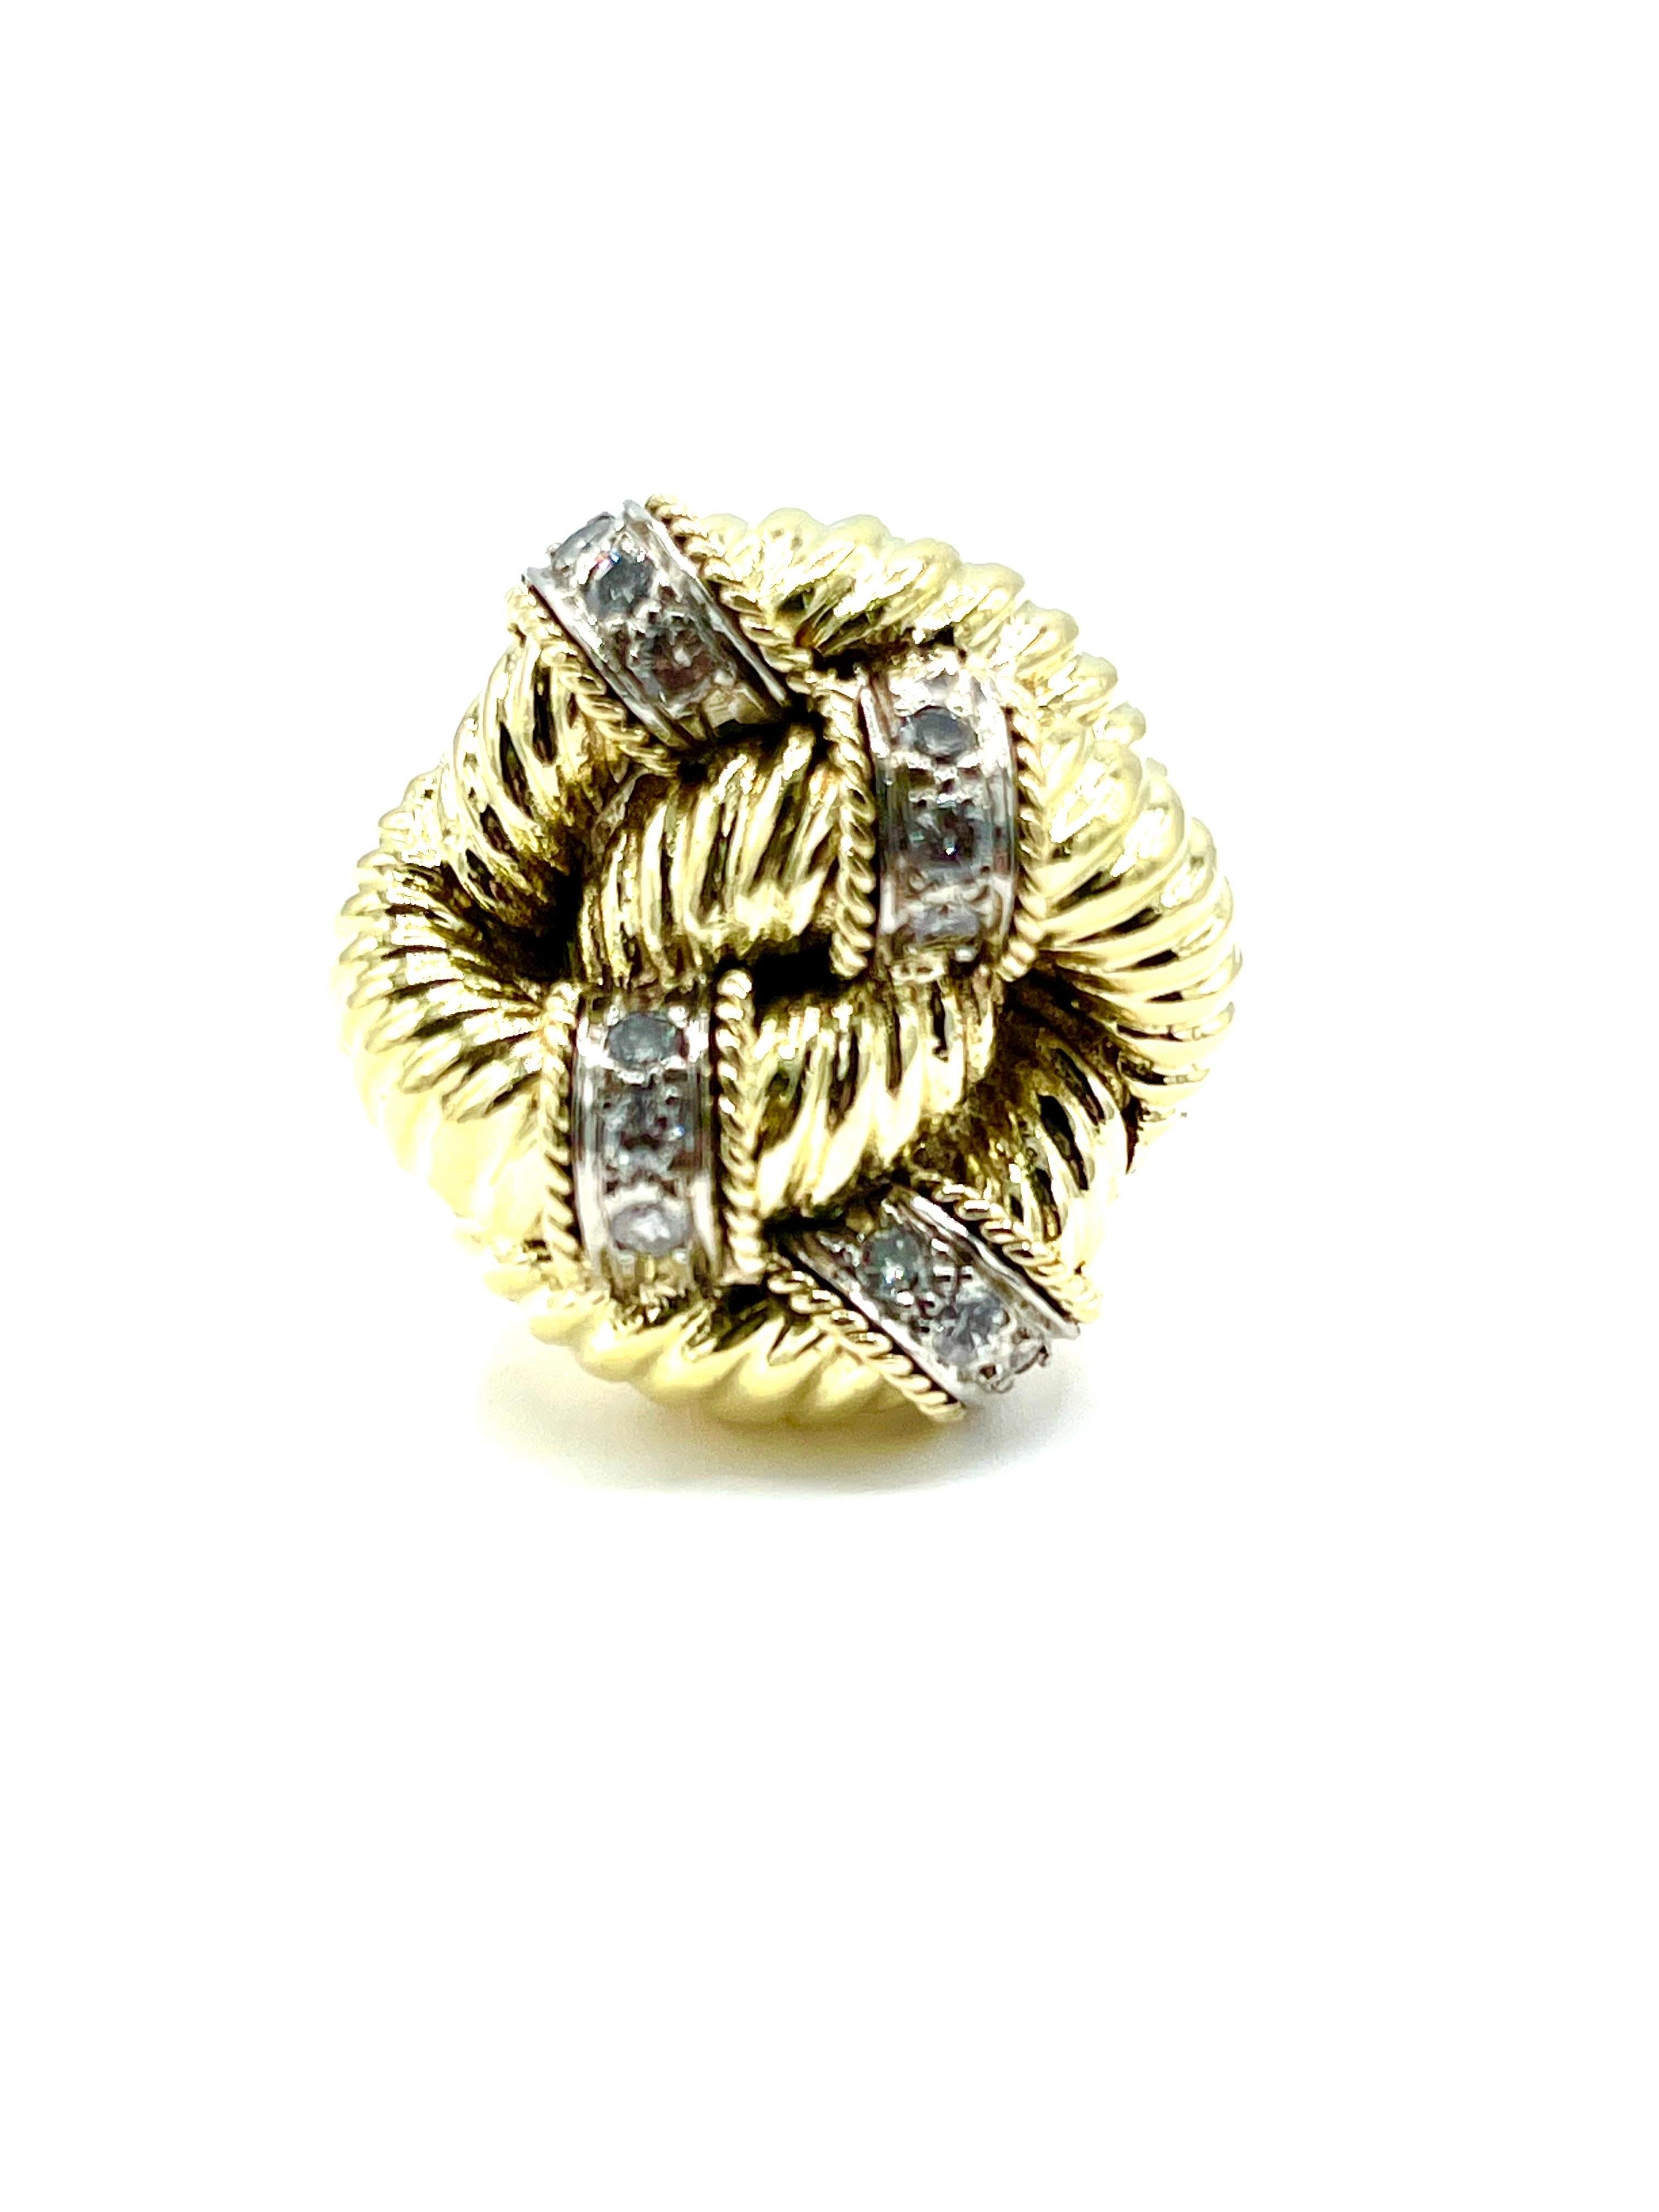 A beautifully designed handcrafted Diamond cocktail ring!  The ring is made in the form of a love knot, with Diamonds set in the loops of 18k yellow gold.  There are 12 Diamonds set throughout the ring with a total weight of .48 carats.  The ring is